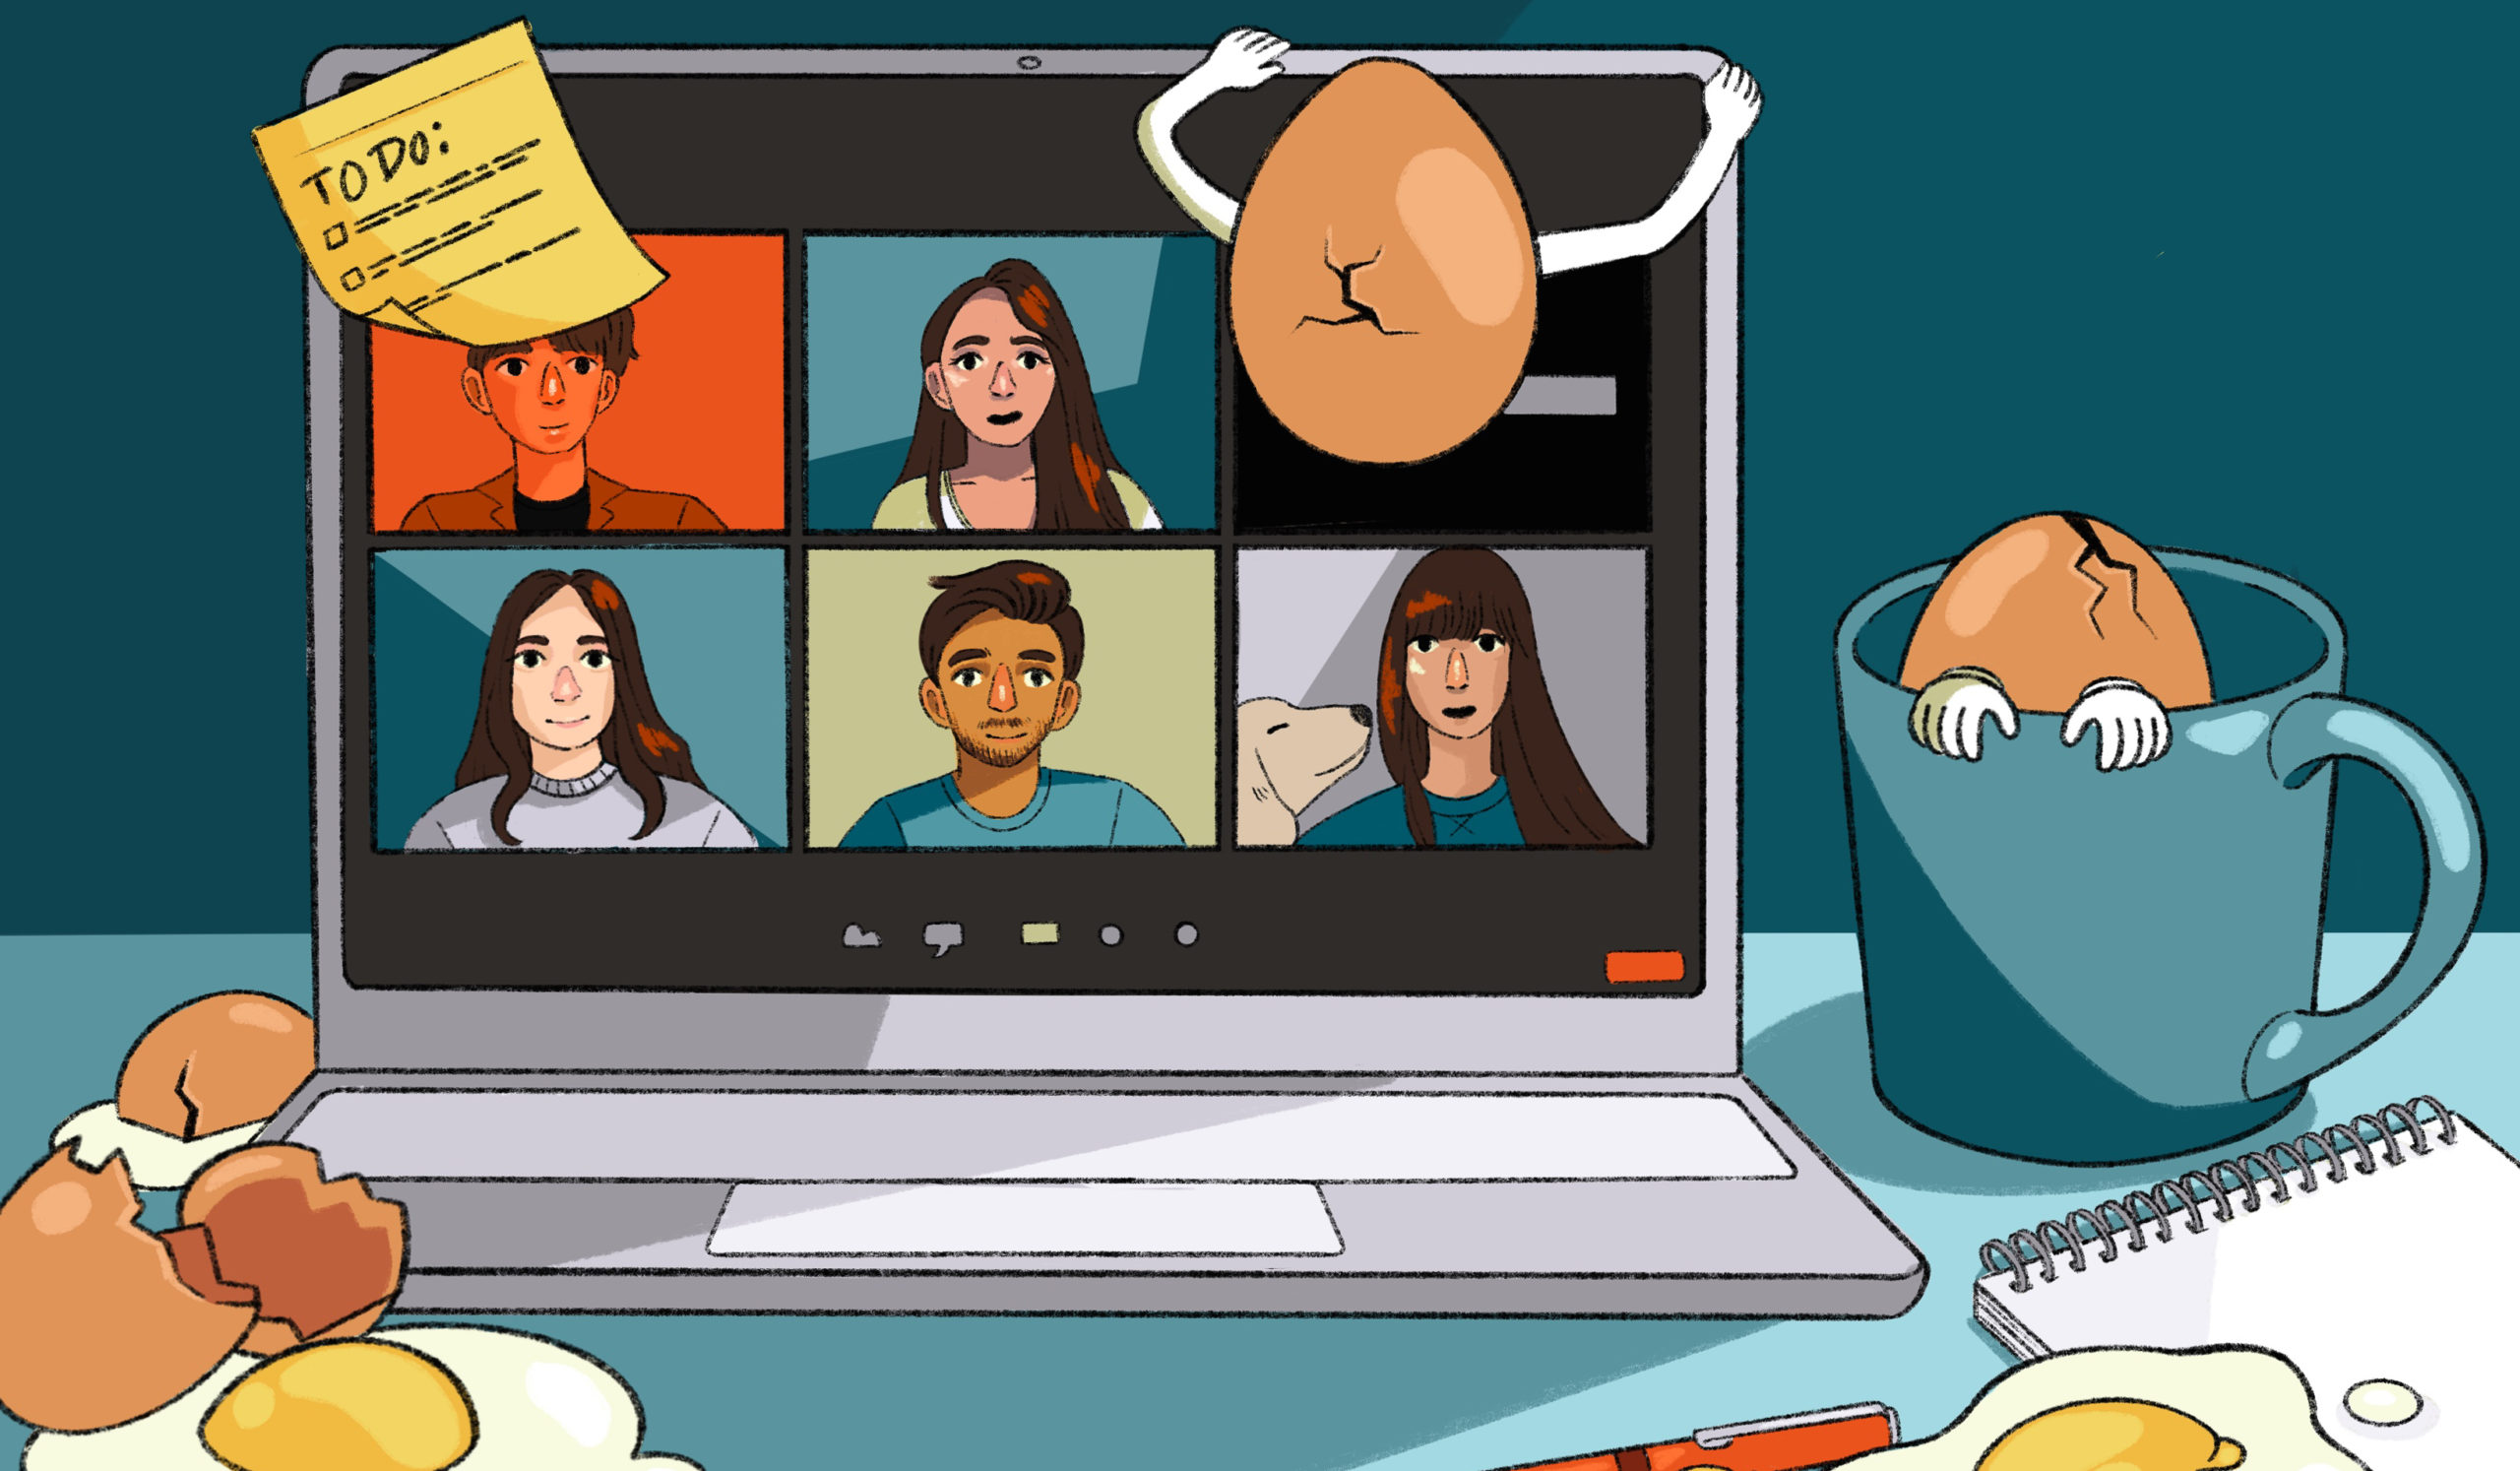 An illustrated image of five people on a Zoom call with a cartoon egg with arms climbing the computer screen and coming out of a coffee mug next to the computer. Two broken eggs are on the desk with a pad and pen.